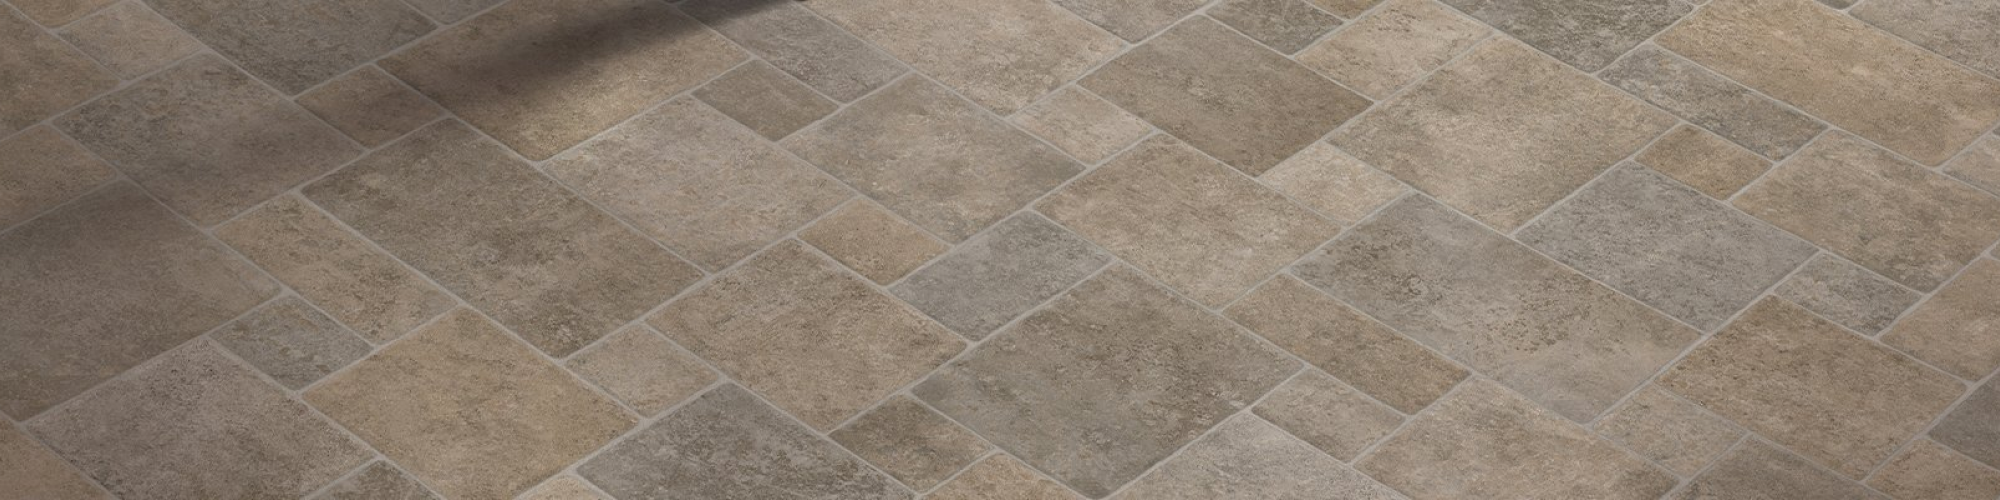 Quality luxury vinyl info provided by Heritage Floor Coverings in the North Royalton, OH area